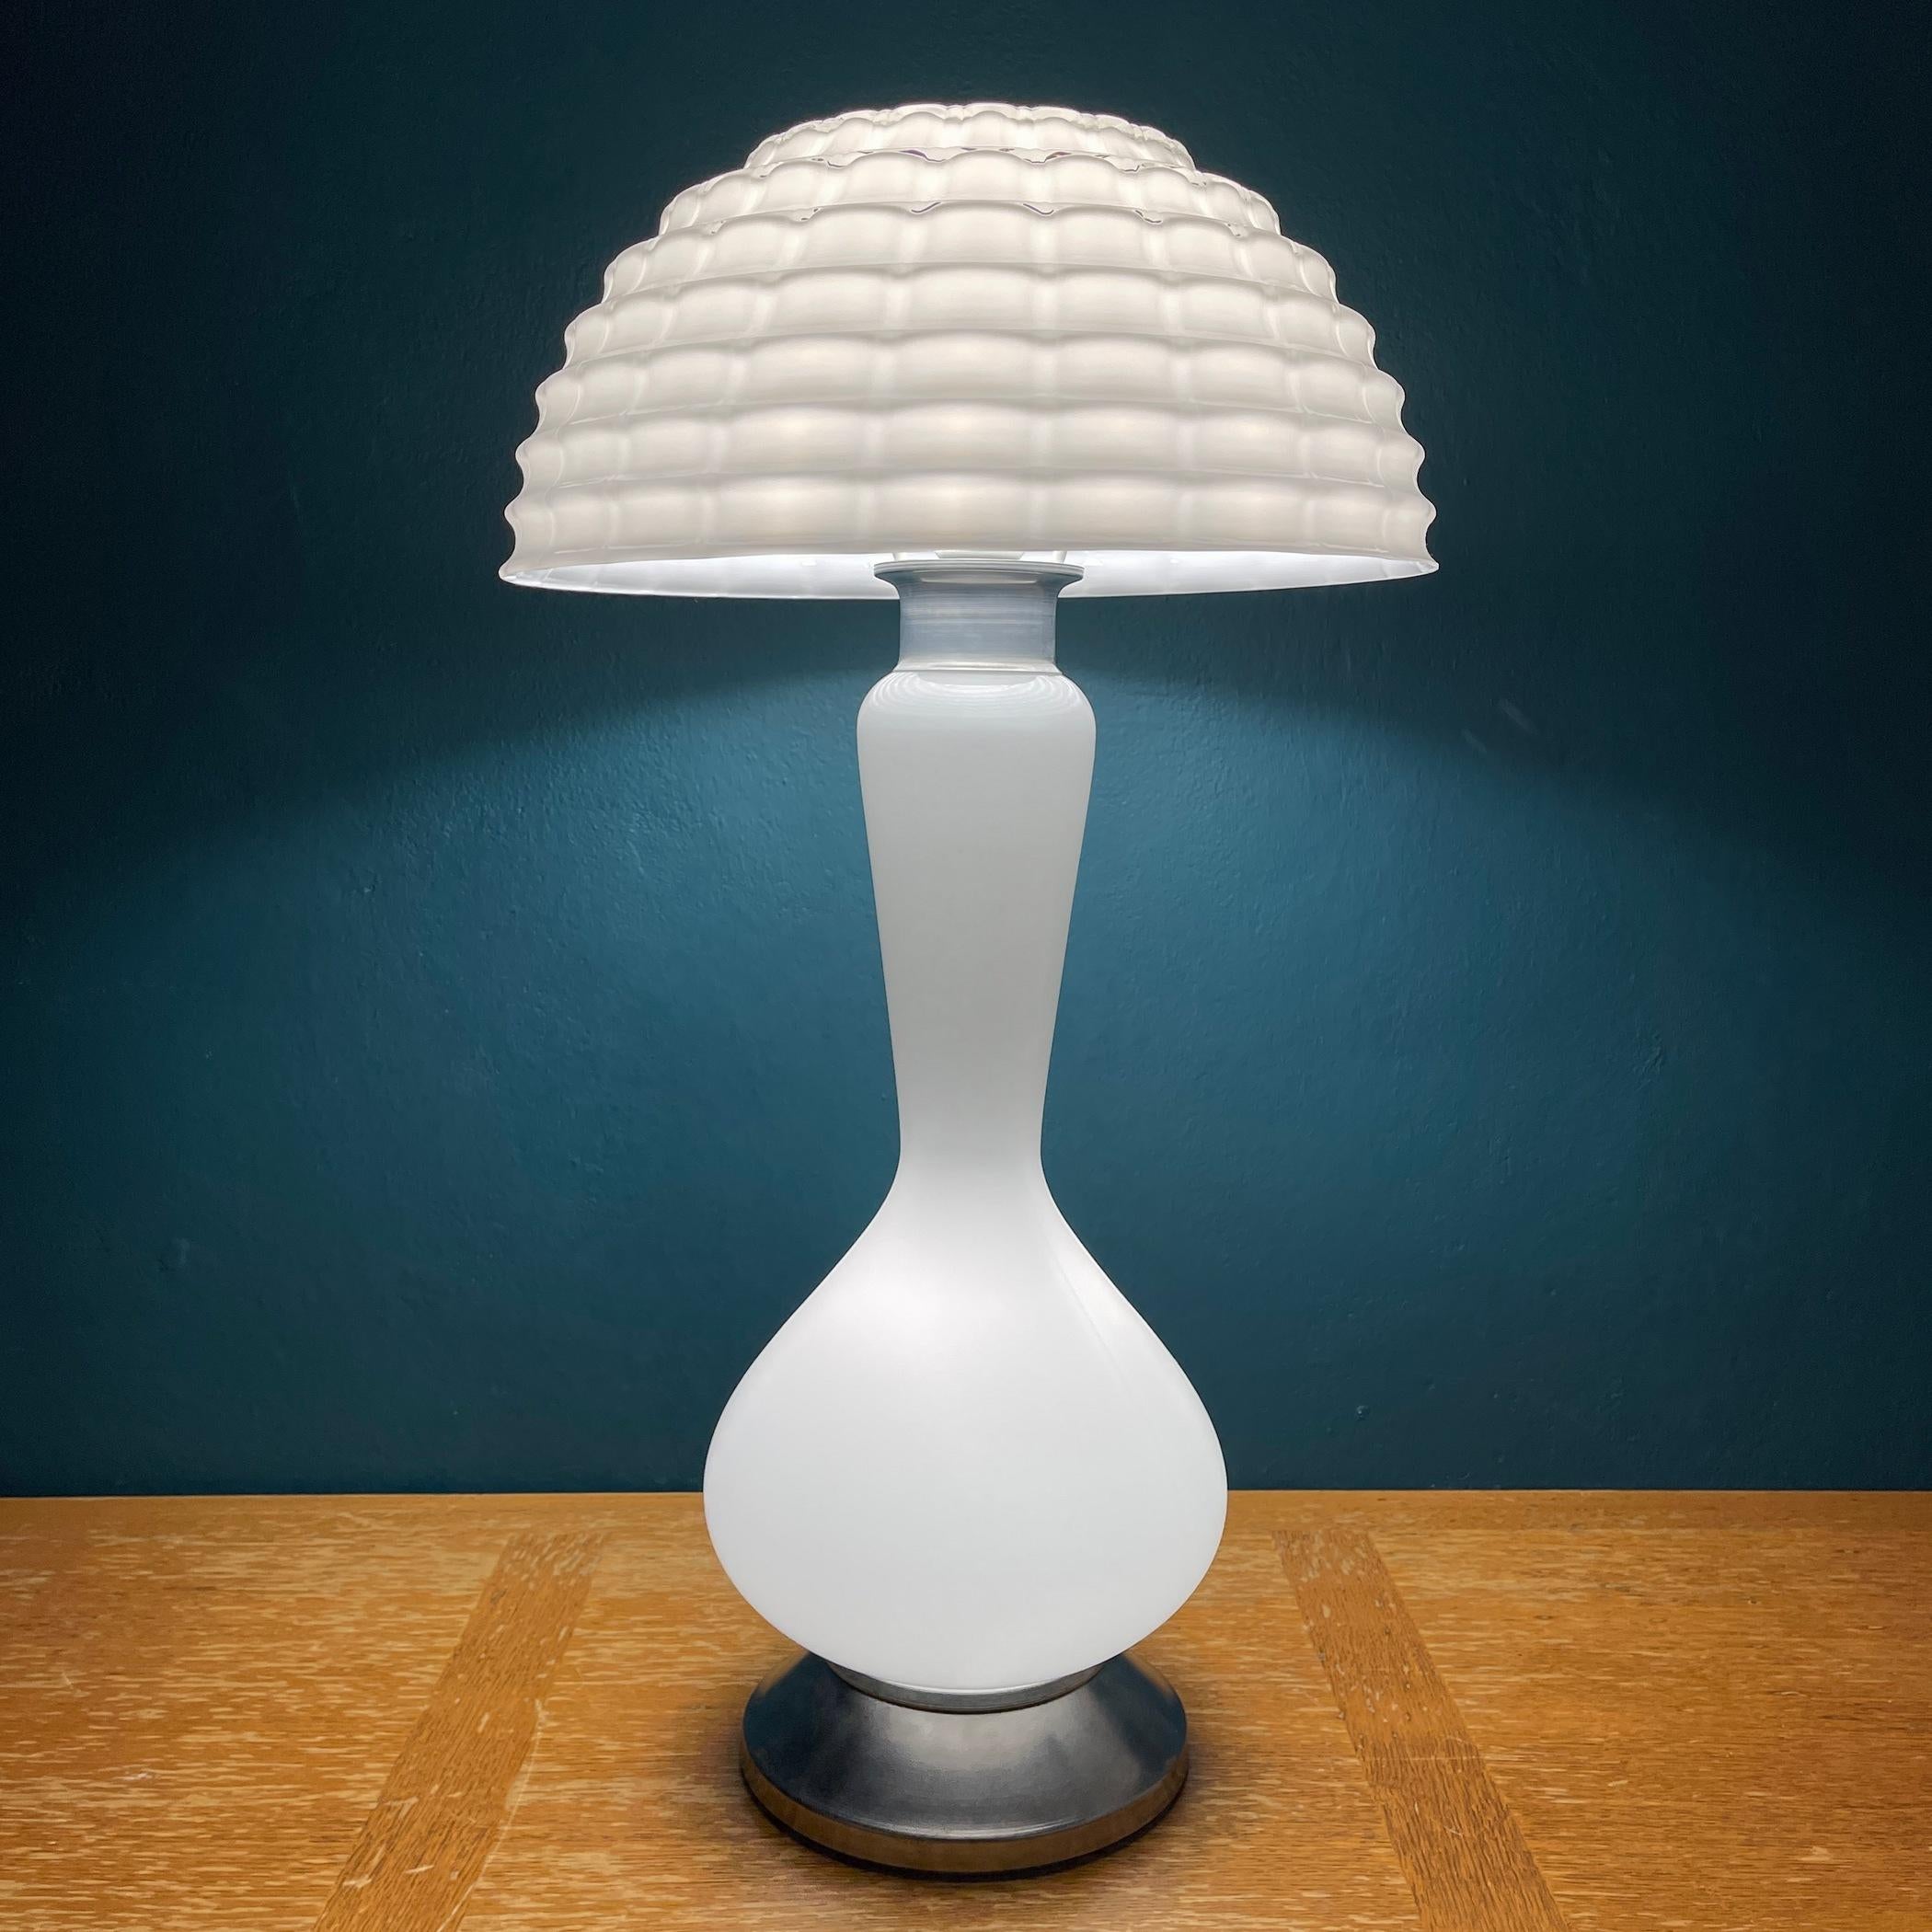 Huge magnificent swirl Murano glass table lamp Mushroom made in Italy in the 1970s. The elegance of the classic murano glass makes this lamp a pleasure to look at. It has one light bulb above and one light bulb in the base. The lamp consists of two